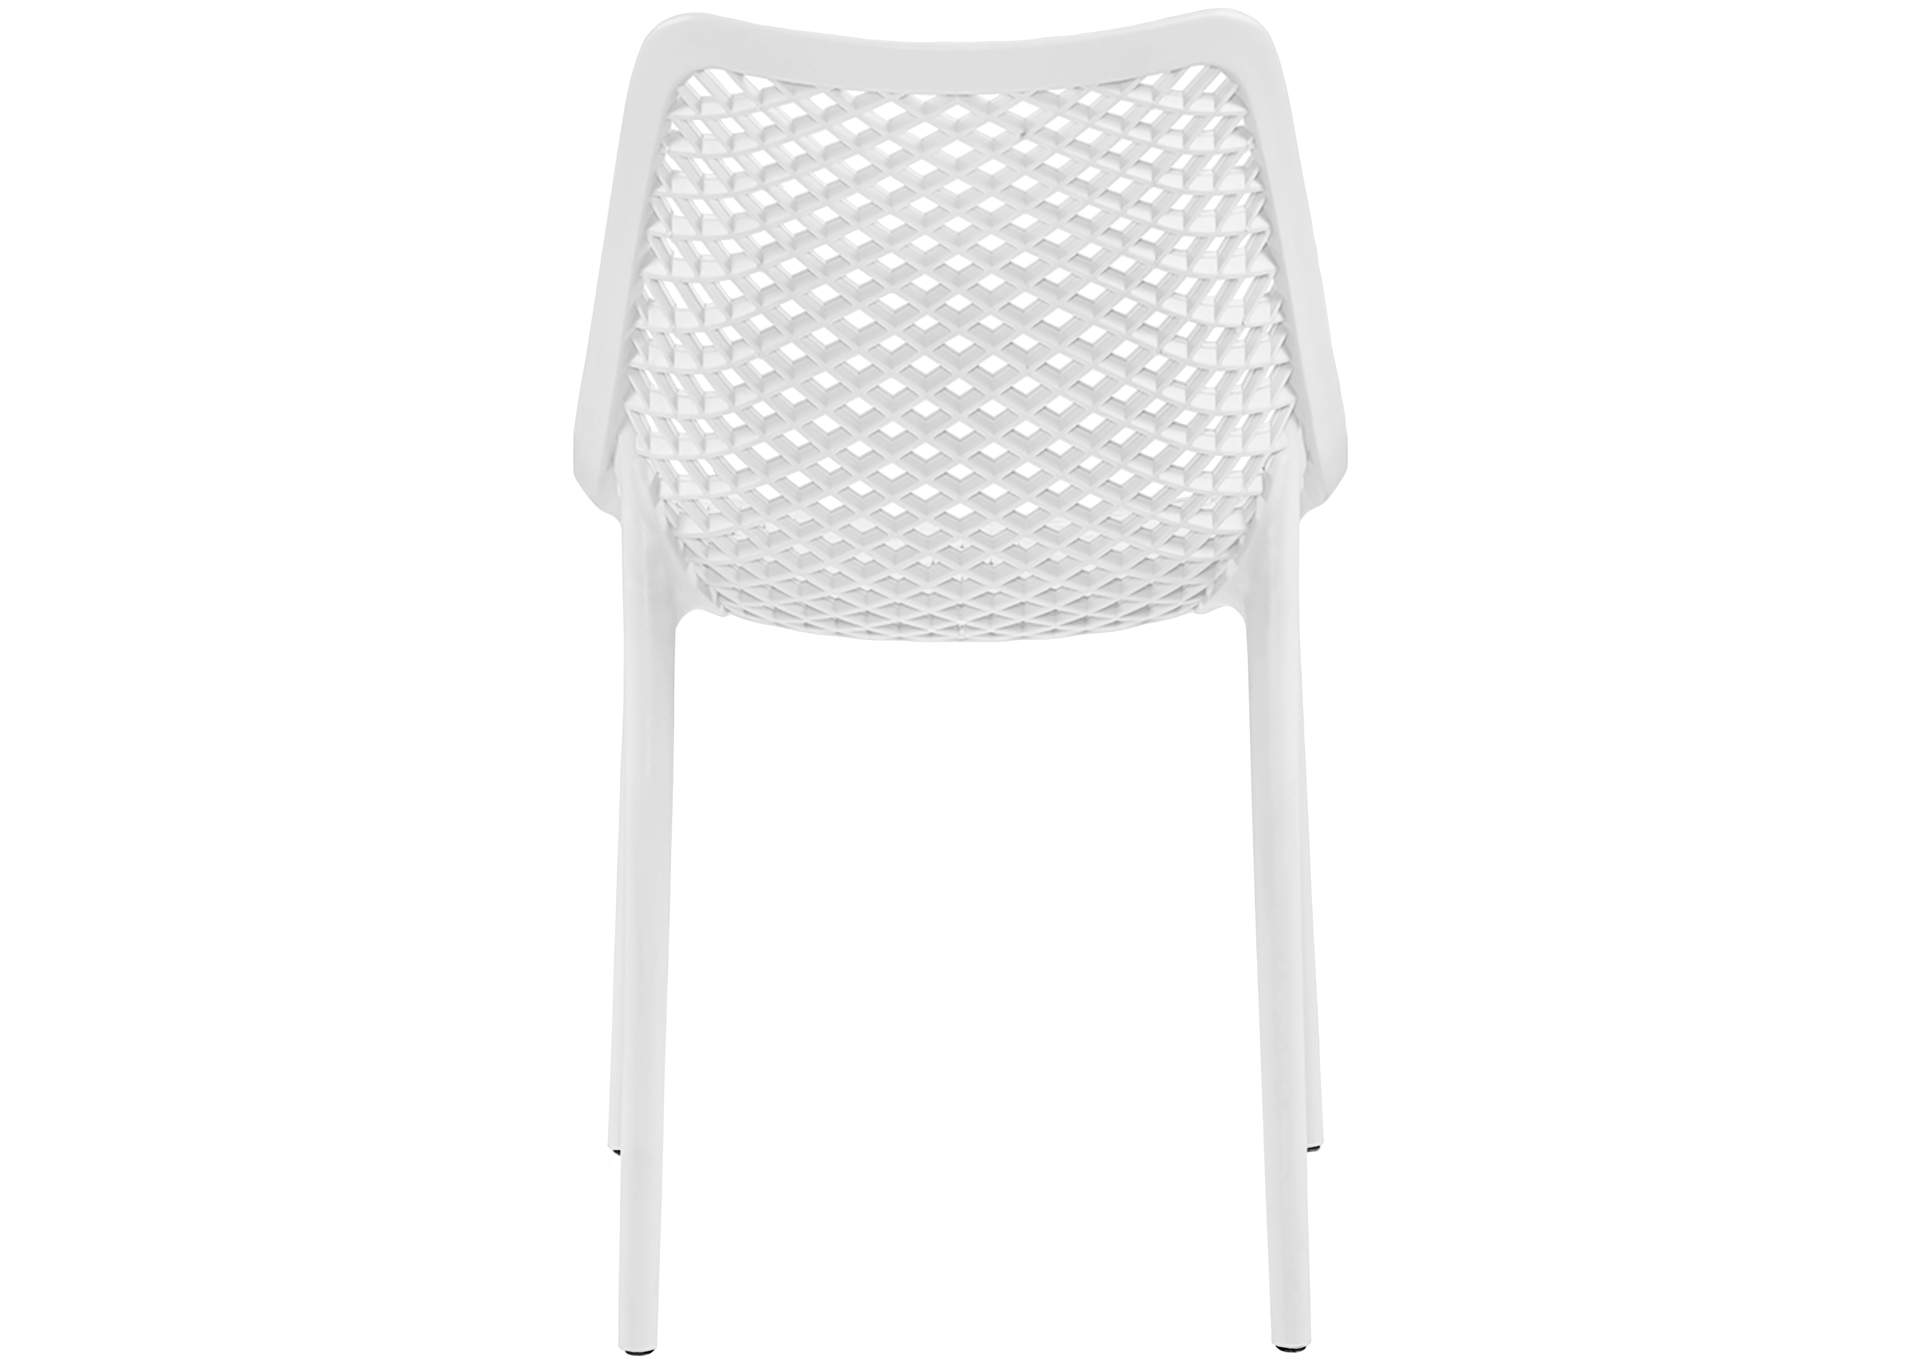 Mykonos White Outdoor Patio Dining Chair Set of 4,Meridian Furniture